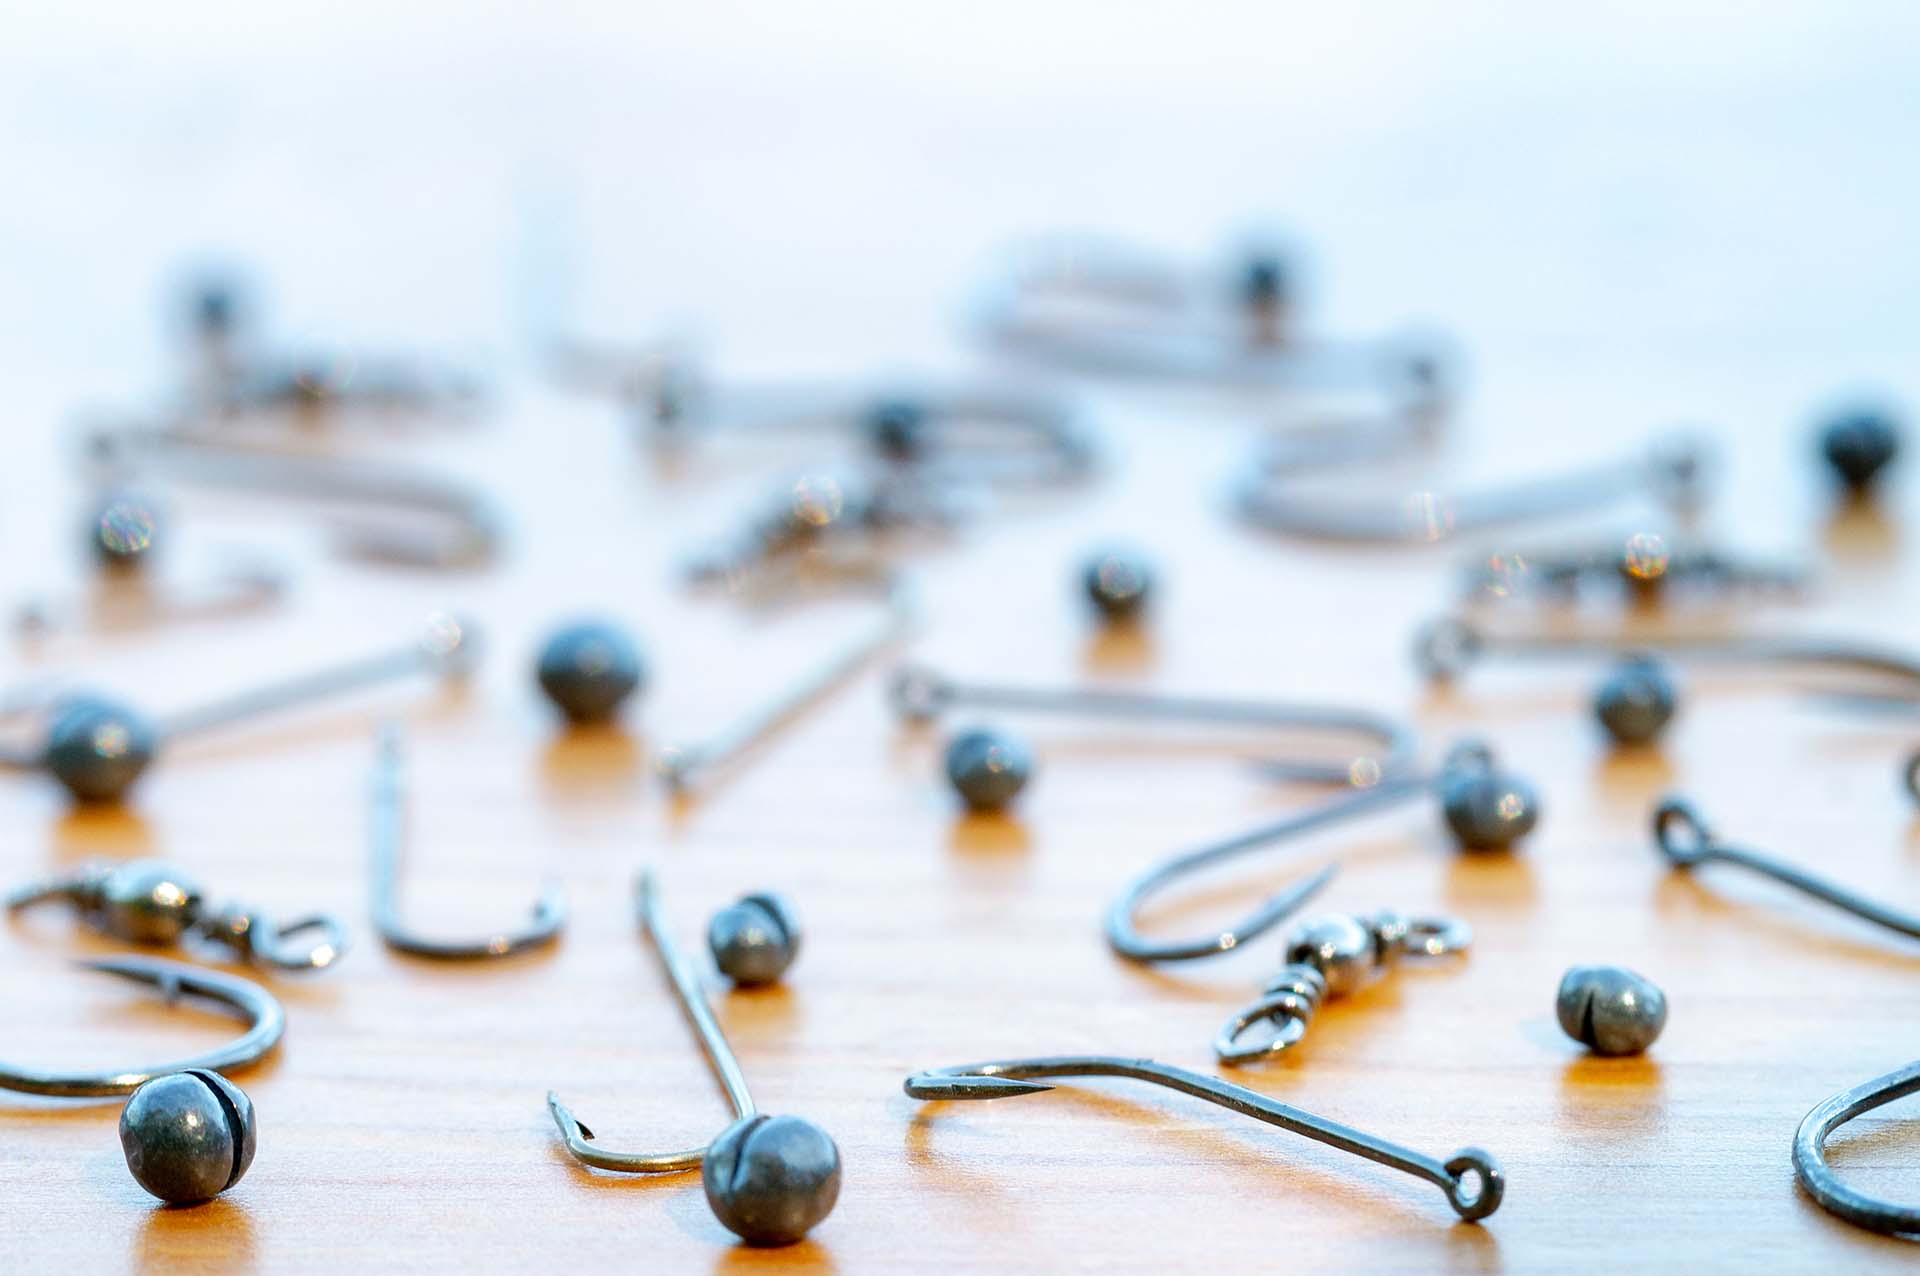 Fishing hooks and sinkers on a table